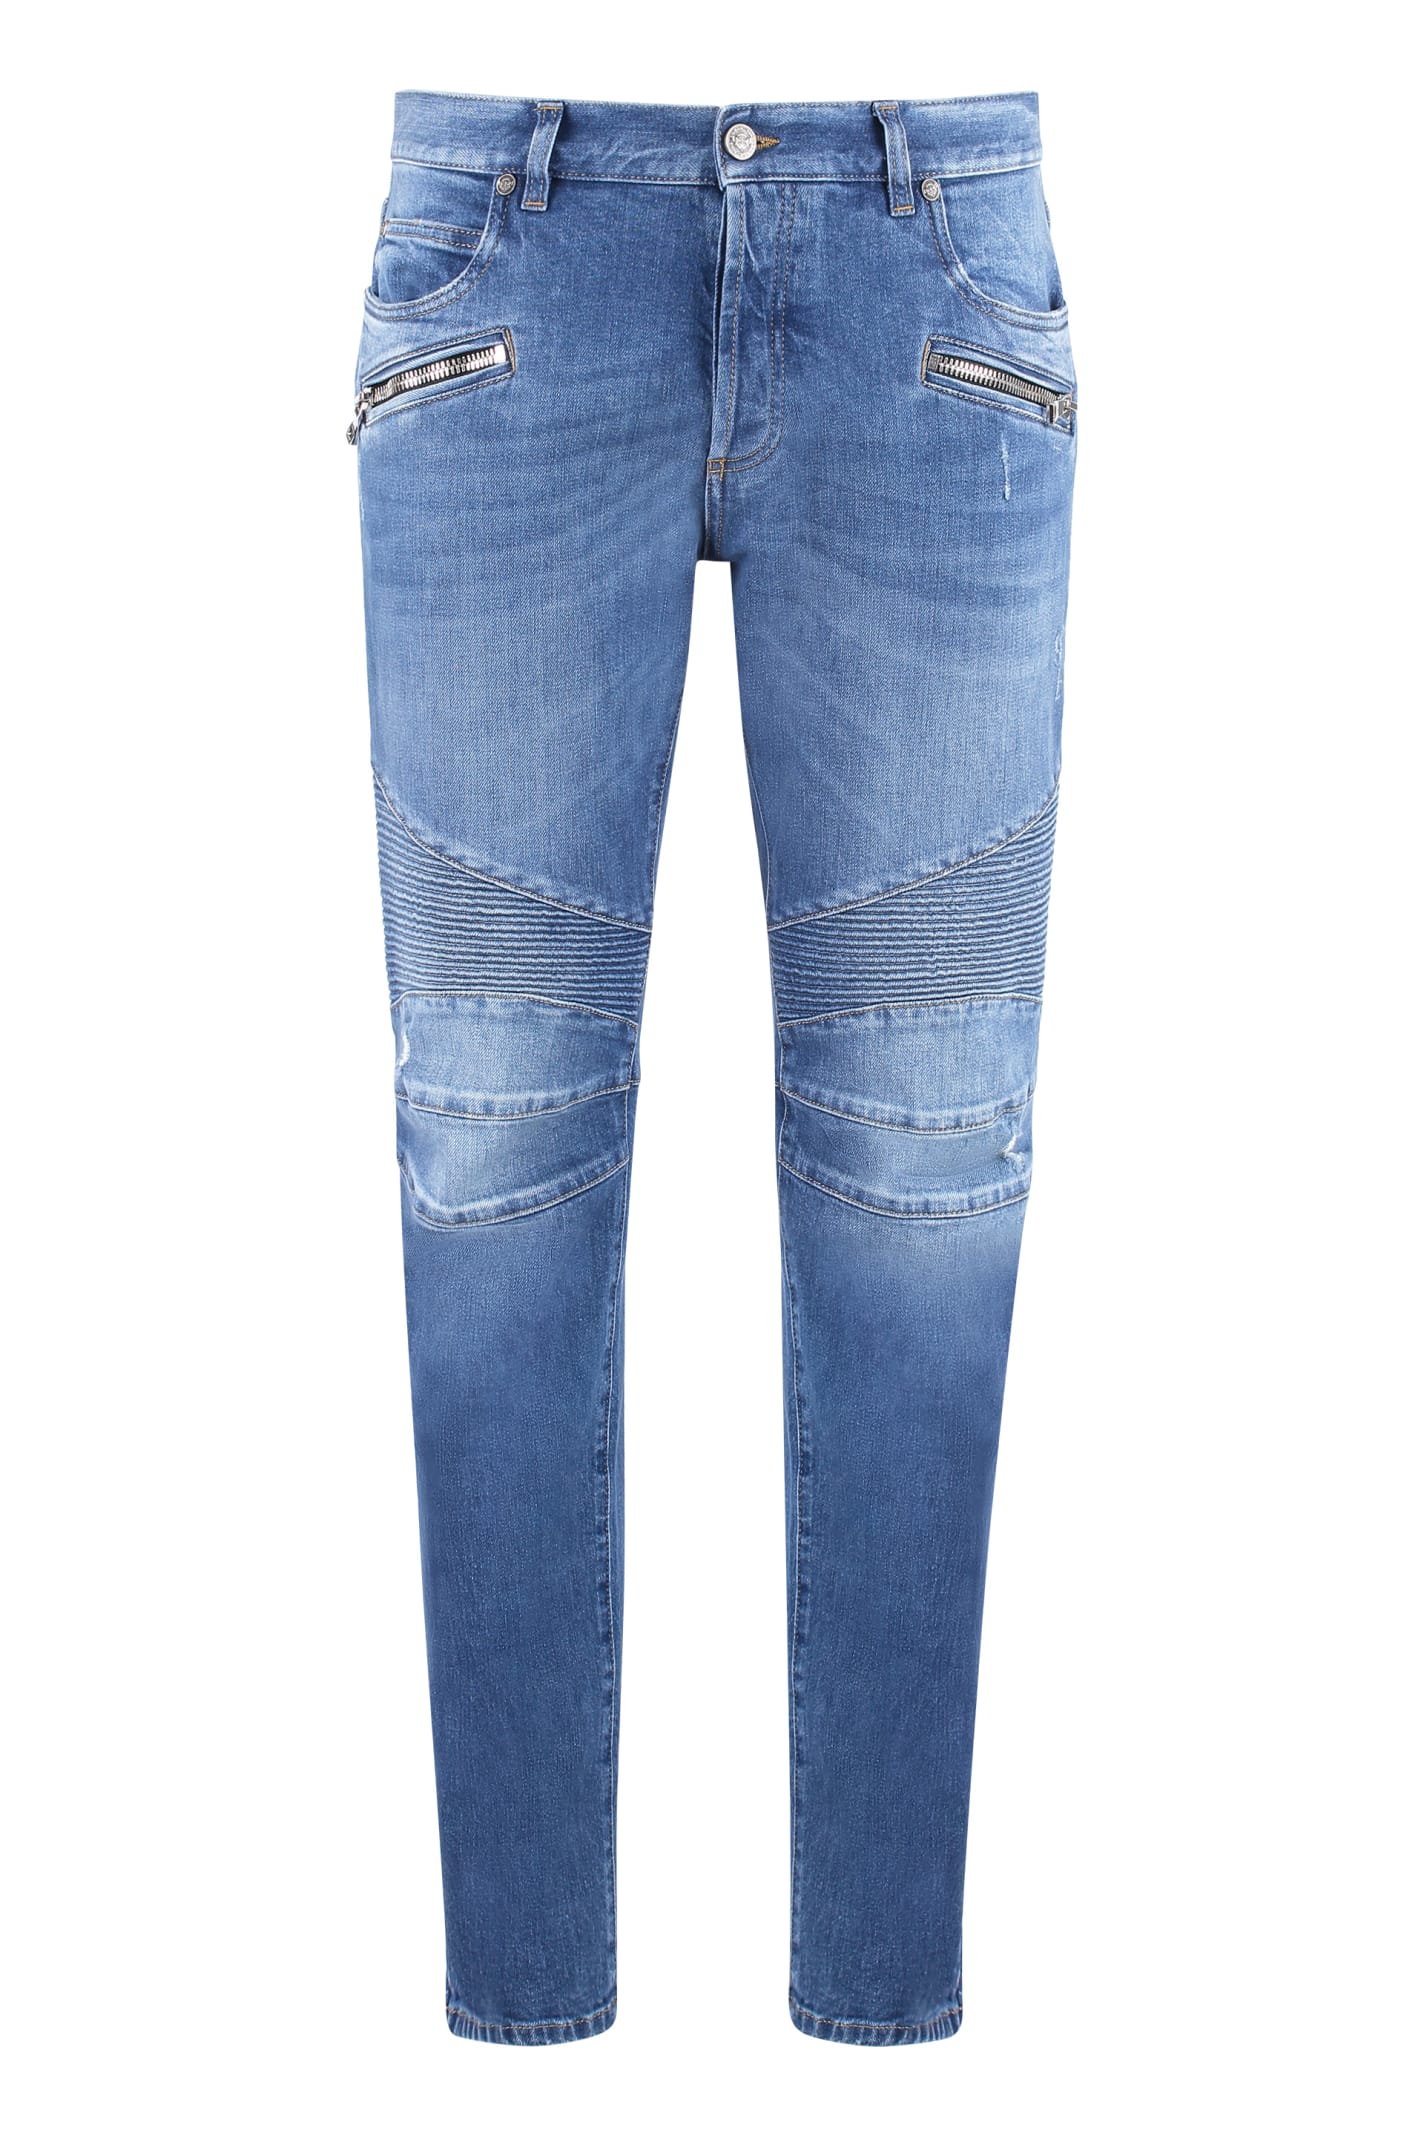 Balmain Tapered Fit Jeans